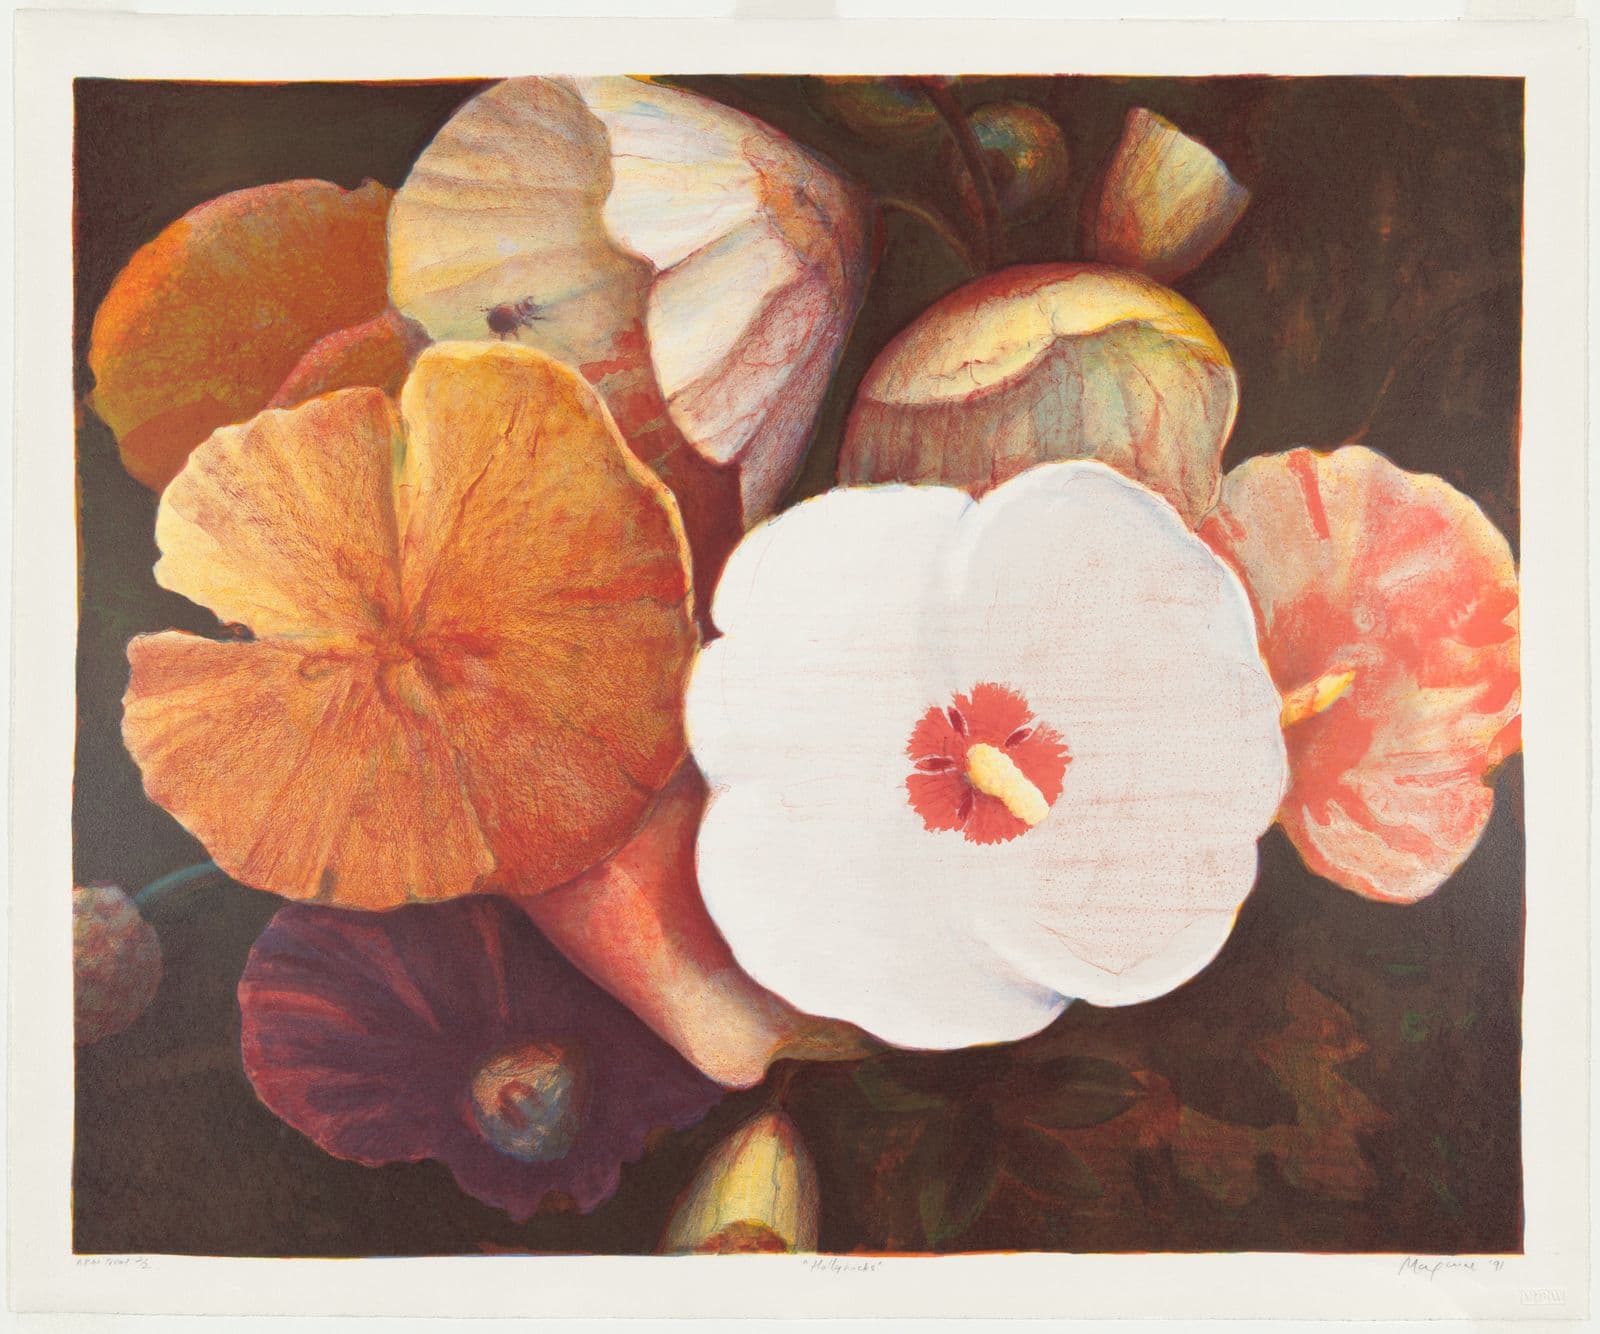 Print of Hollyhock flowers in white, pink, and orange